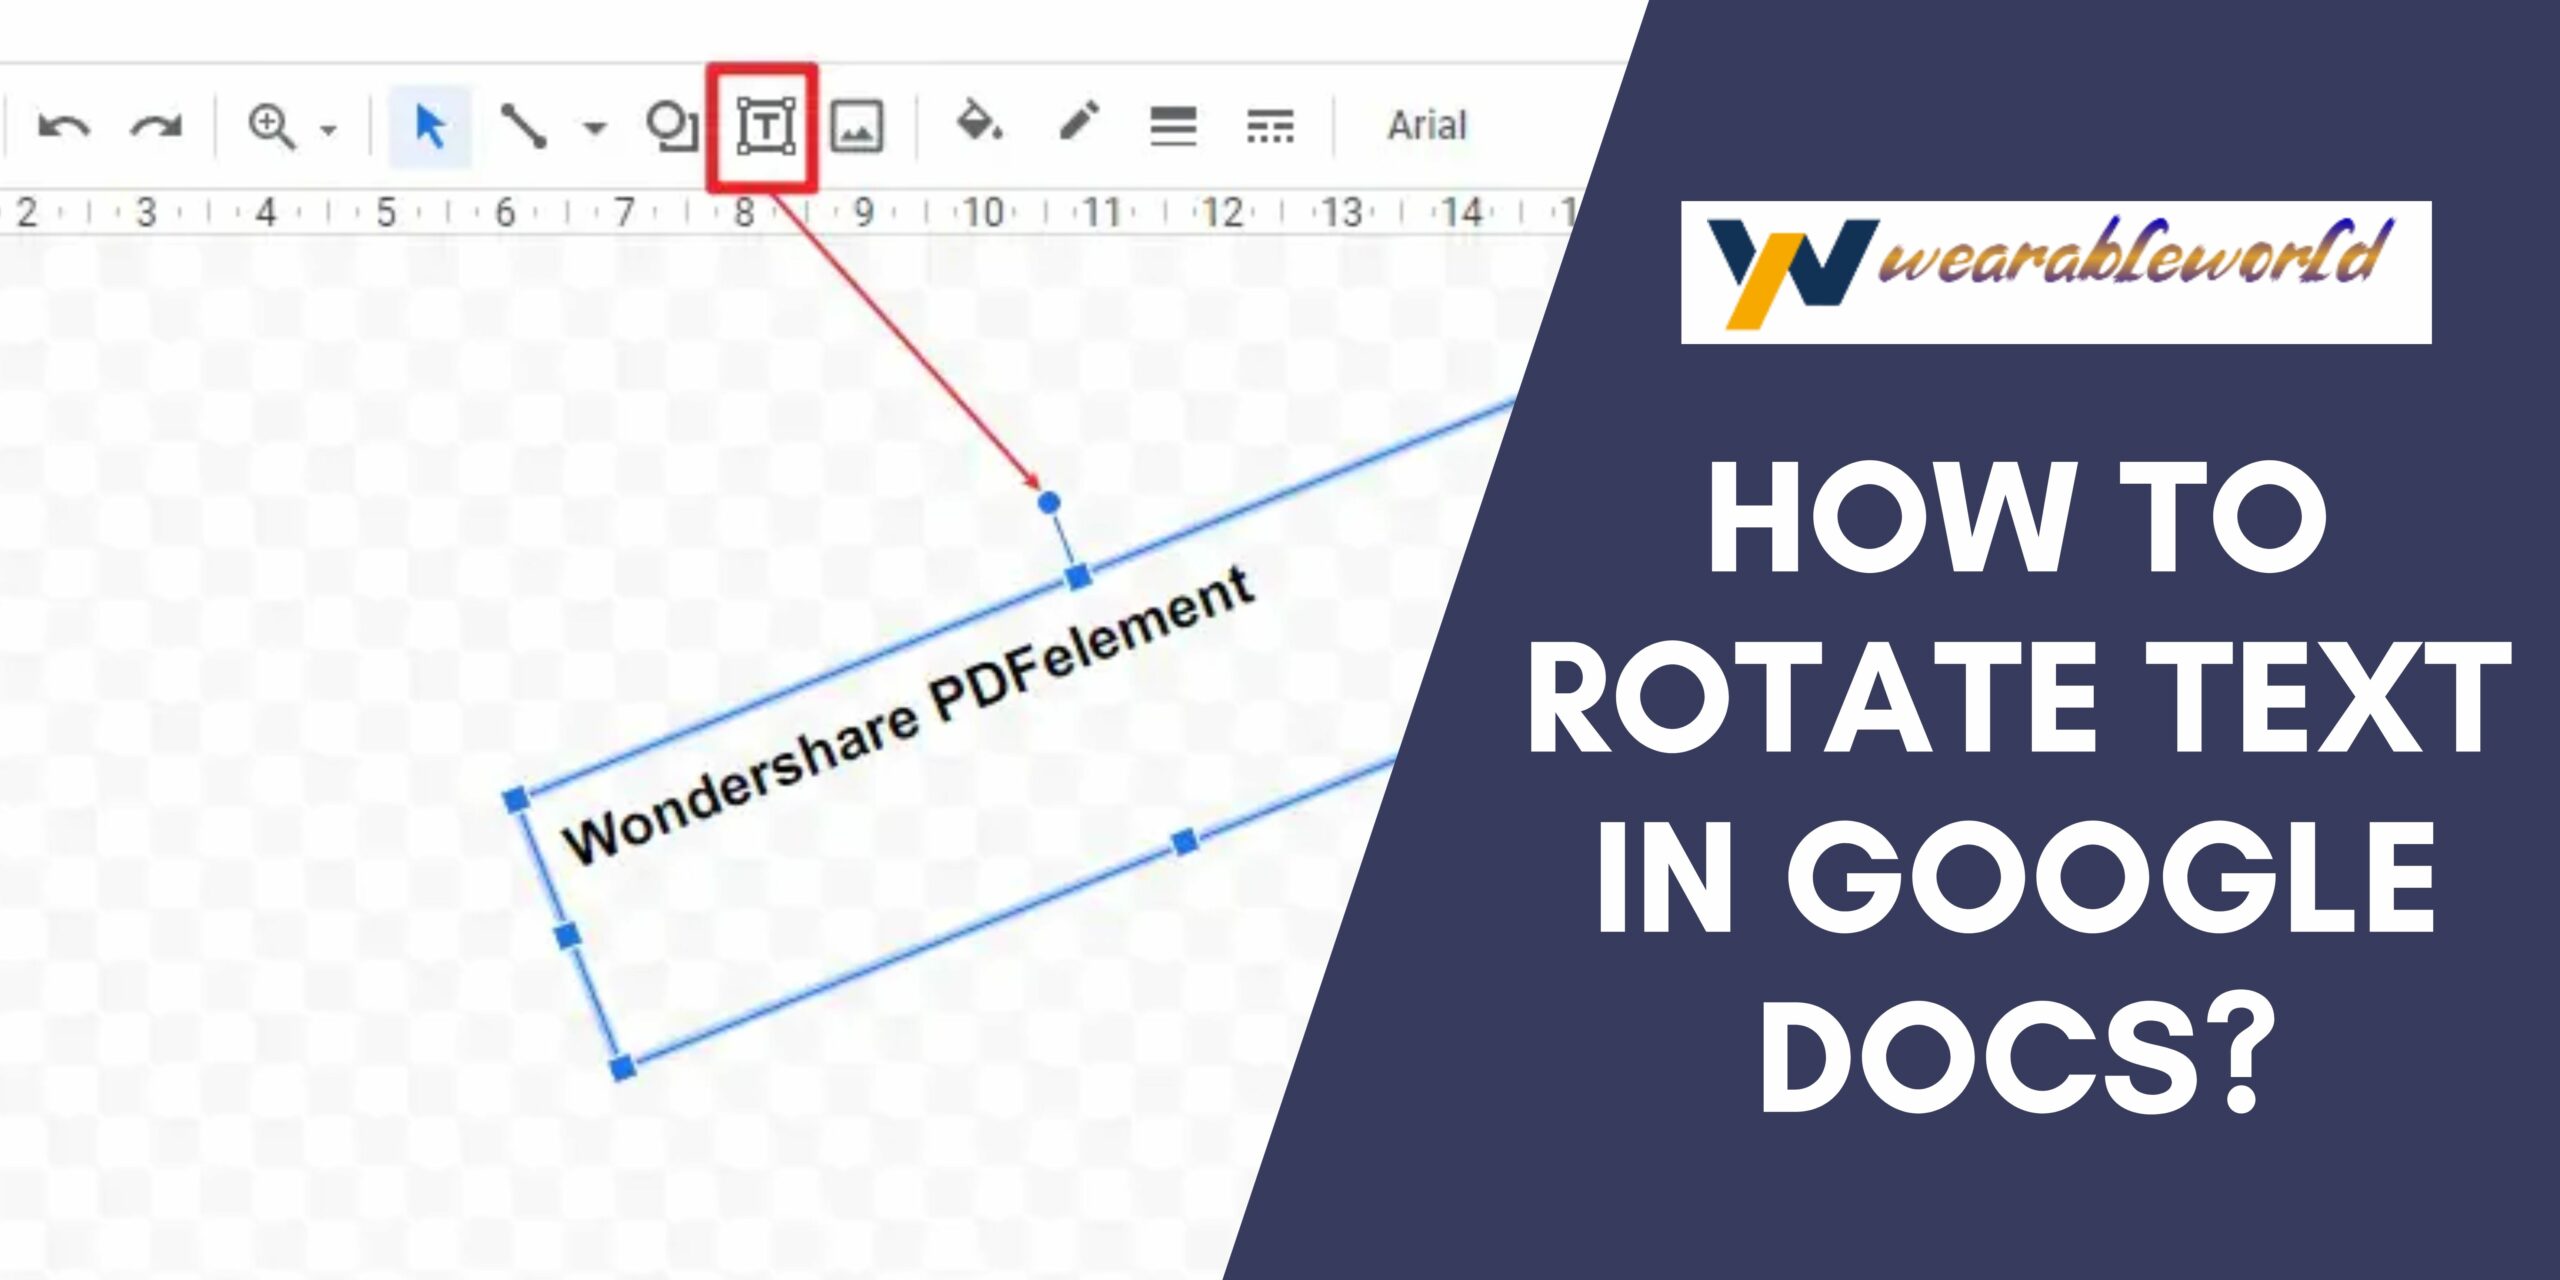 Rotate text in Google Docs